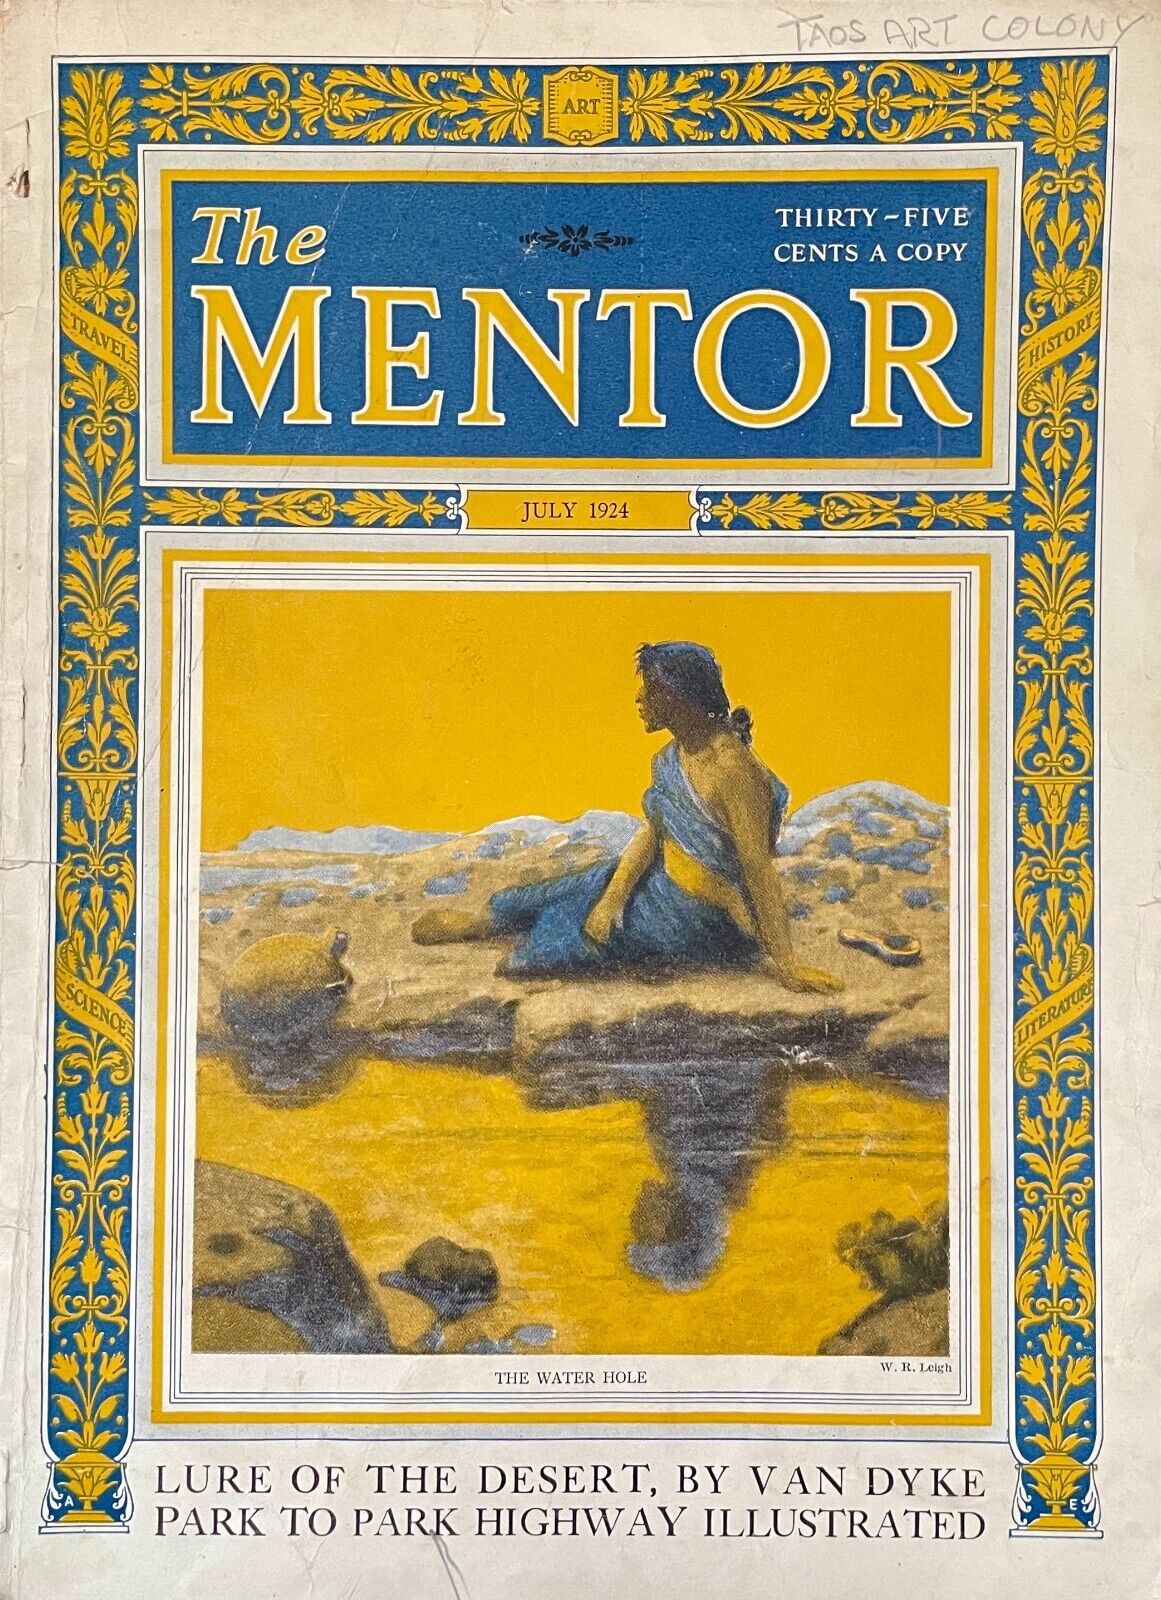 ANTIQUE 1924 PUBLICATION-THE MENTOR-TAOS ART COLONY-SW NATIVE AMERICAN AREA-MORE